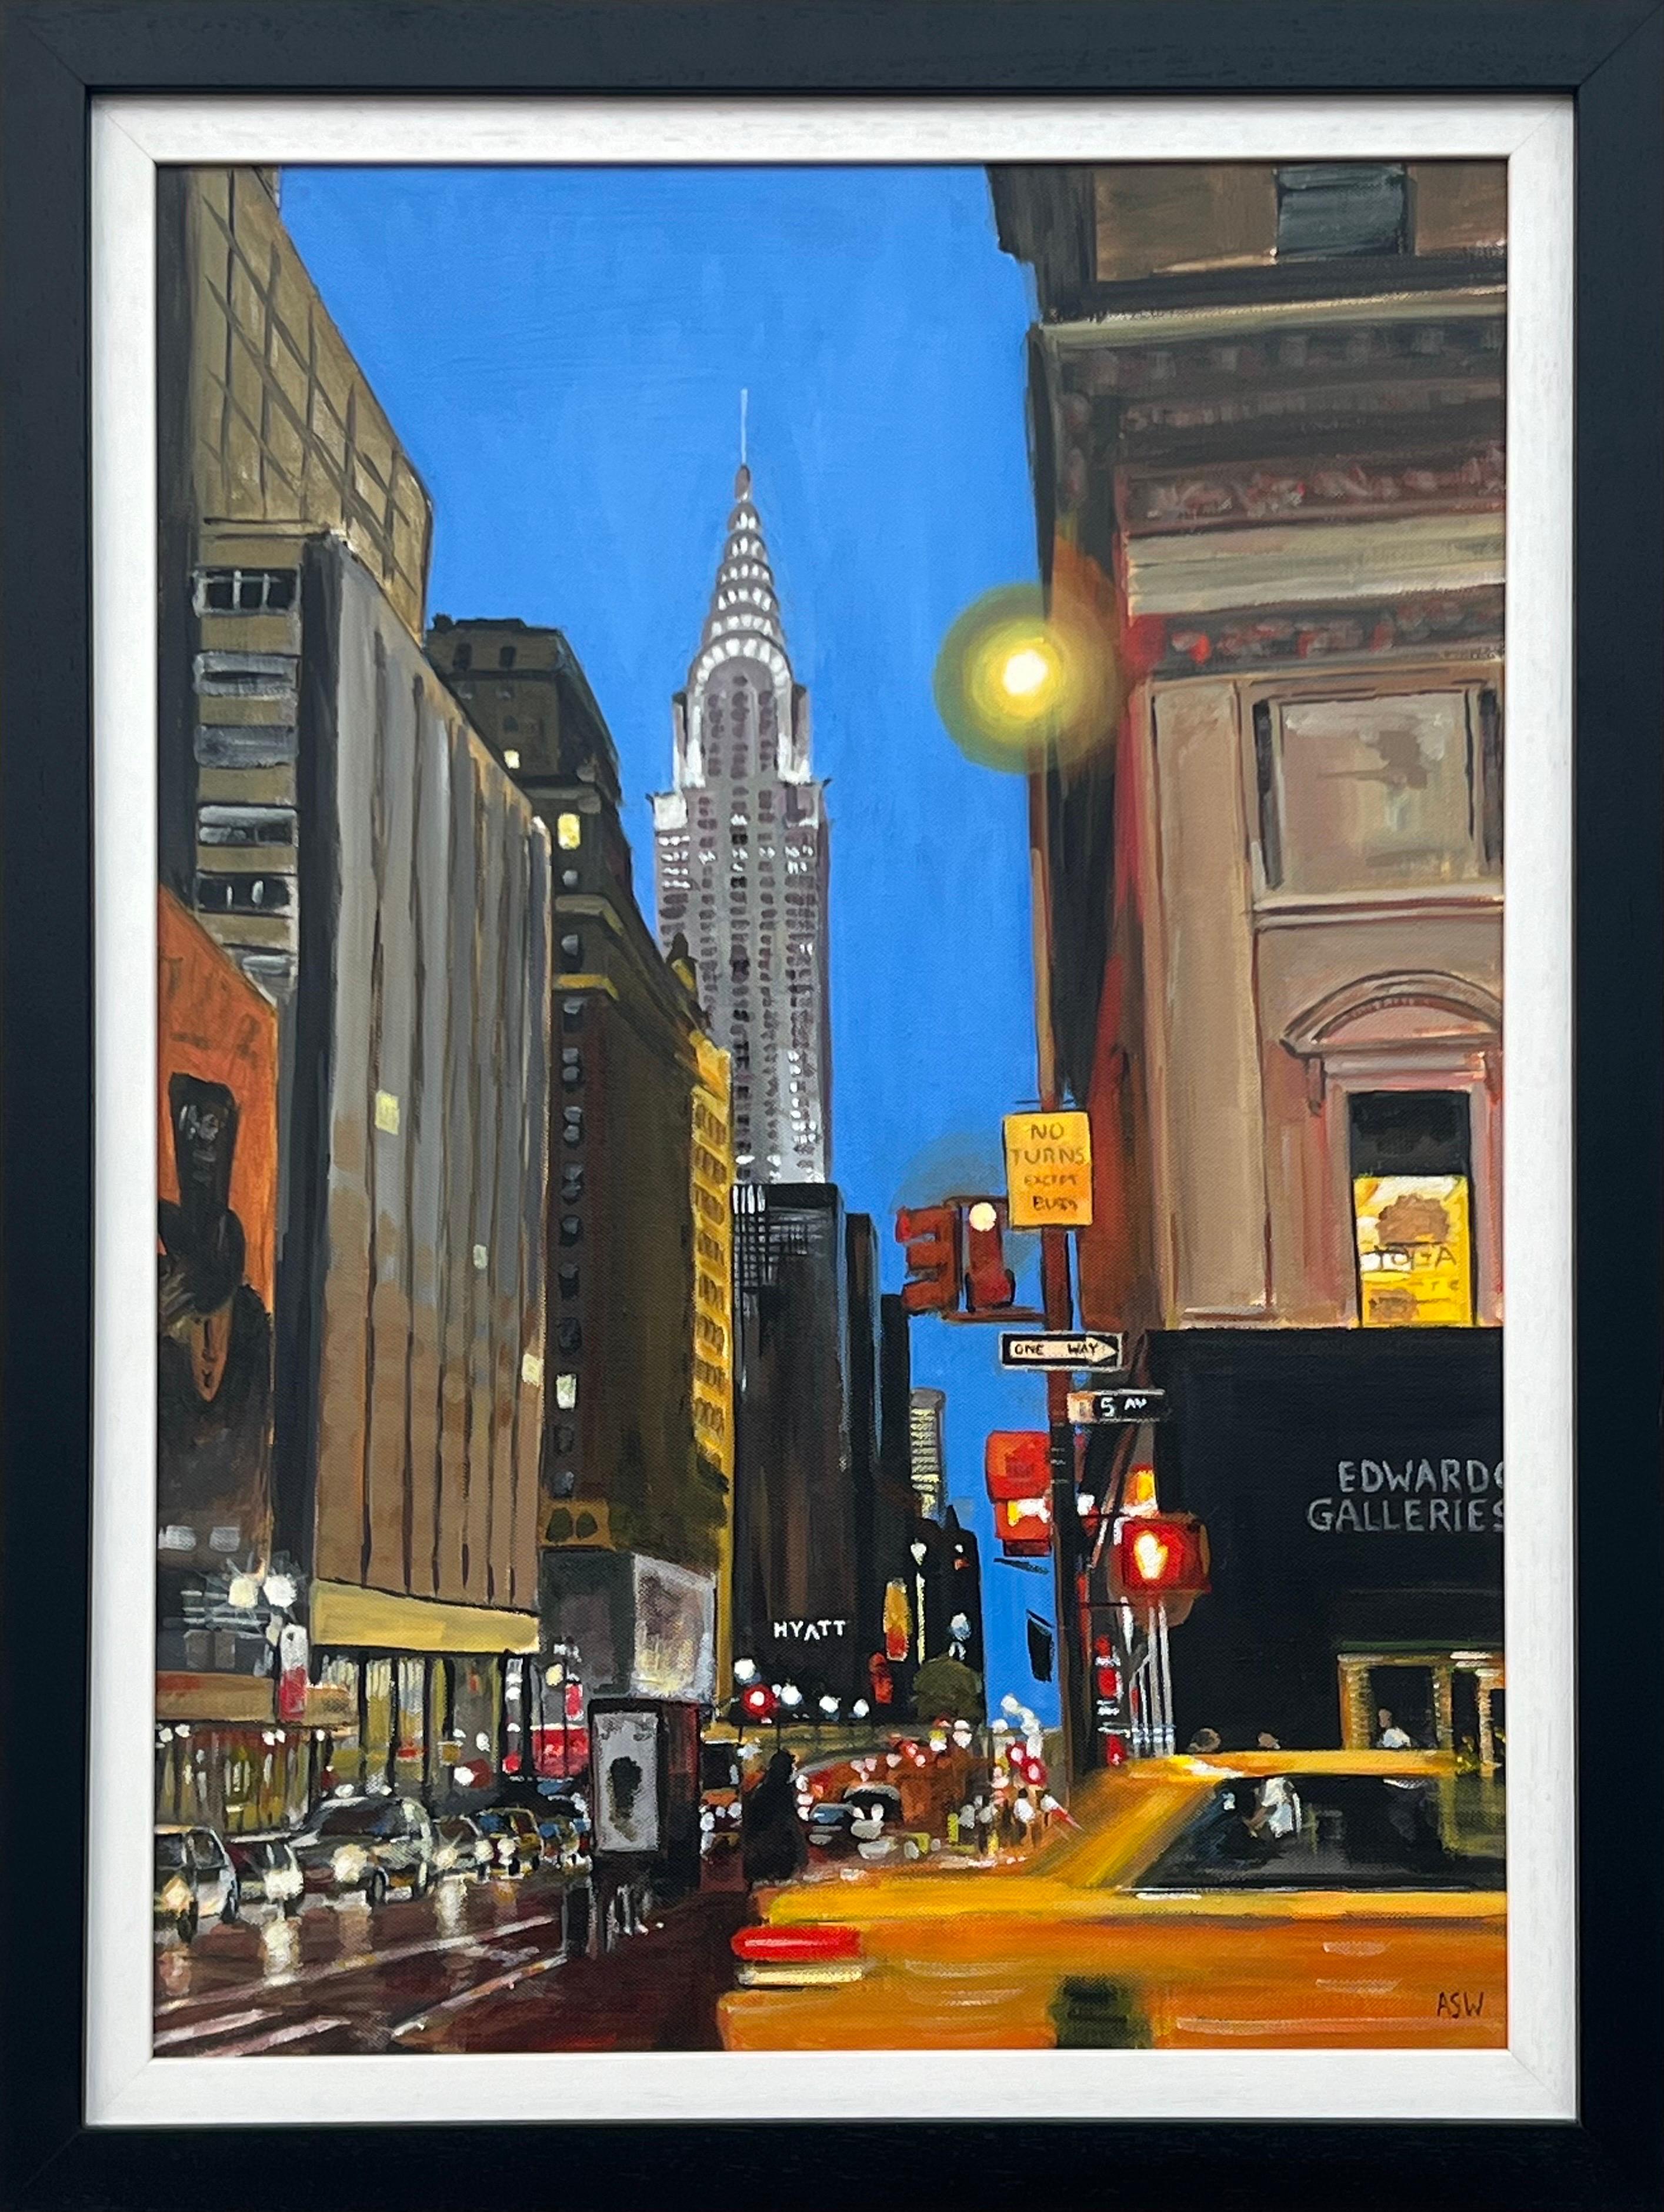 Angela Wakefield Figurative Painting - Chrysler Building Taxi Fifth Avenue New York City by Contemporary British Artist